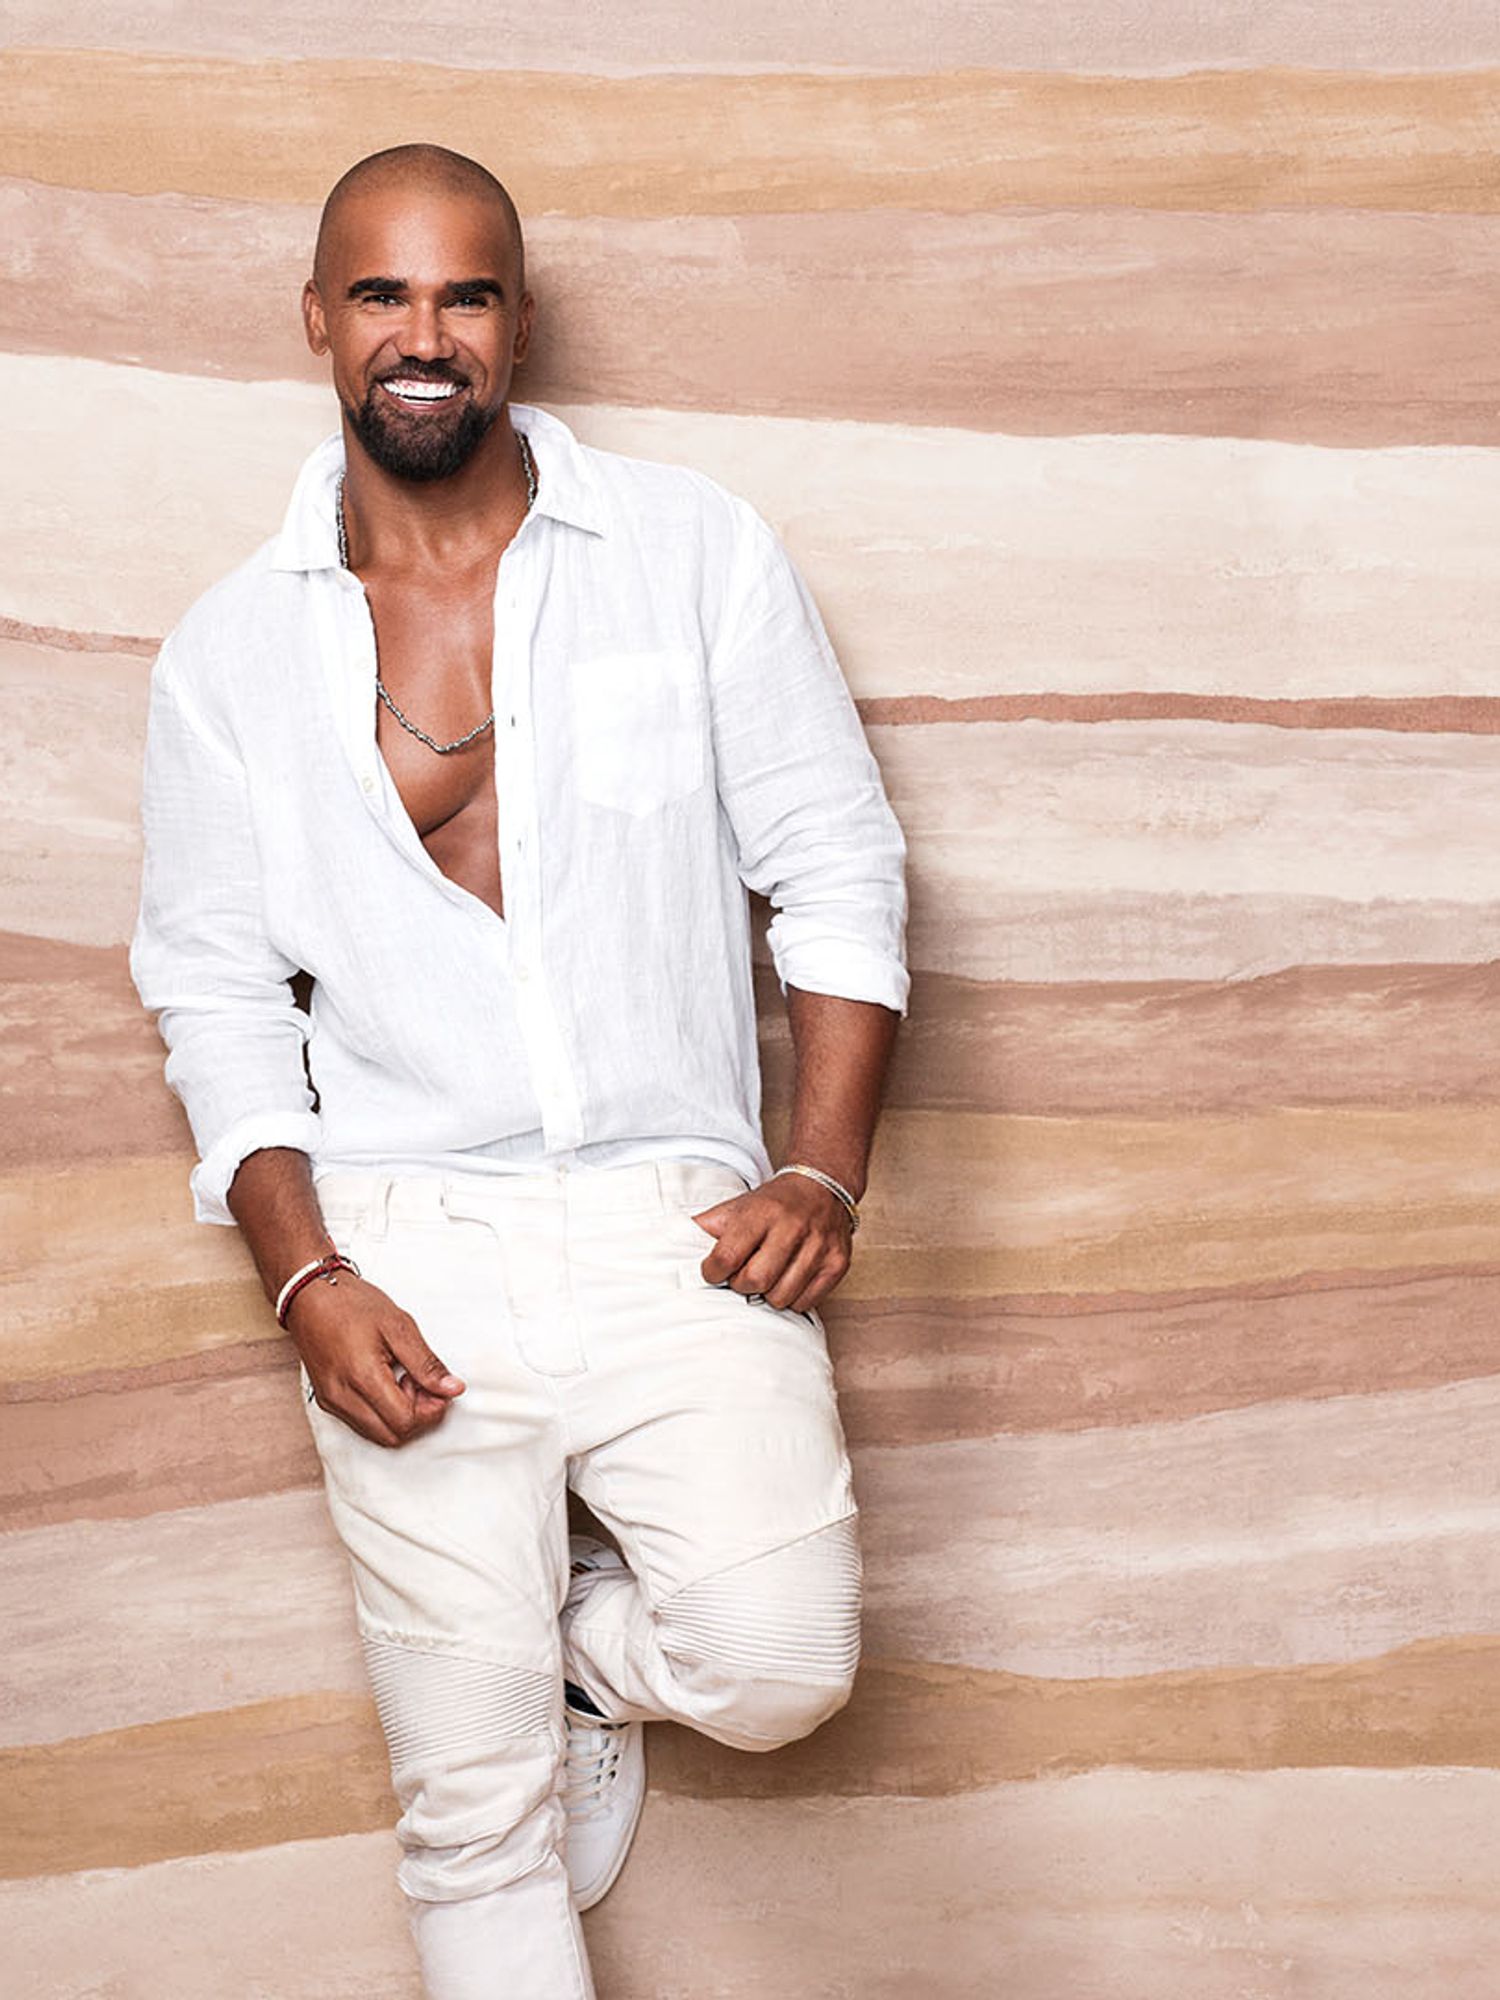 Shemar Moore of SWAT in all white ensemble